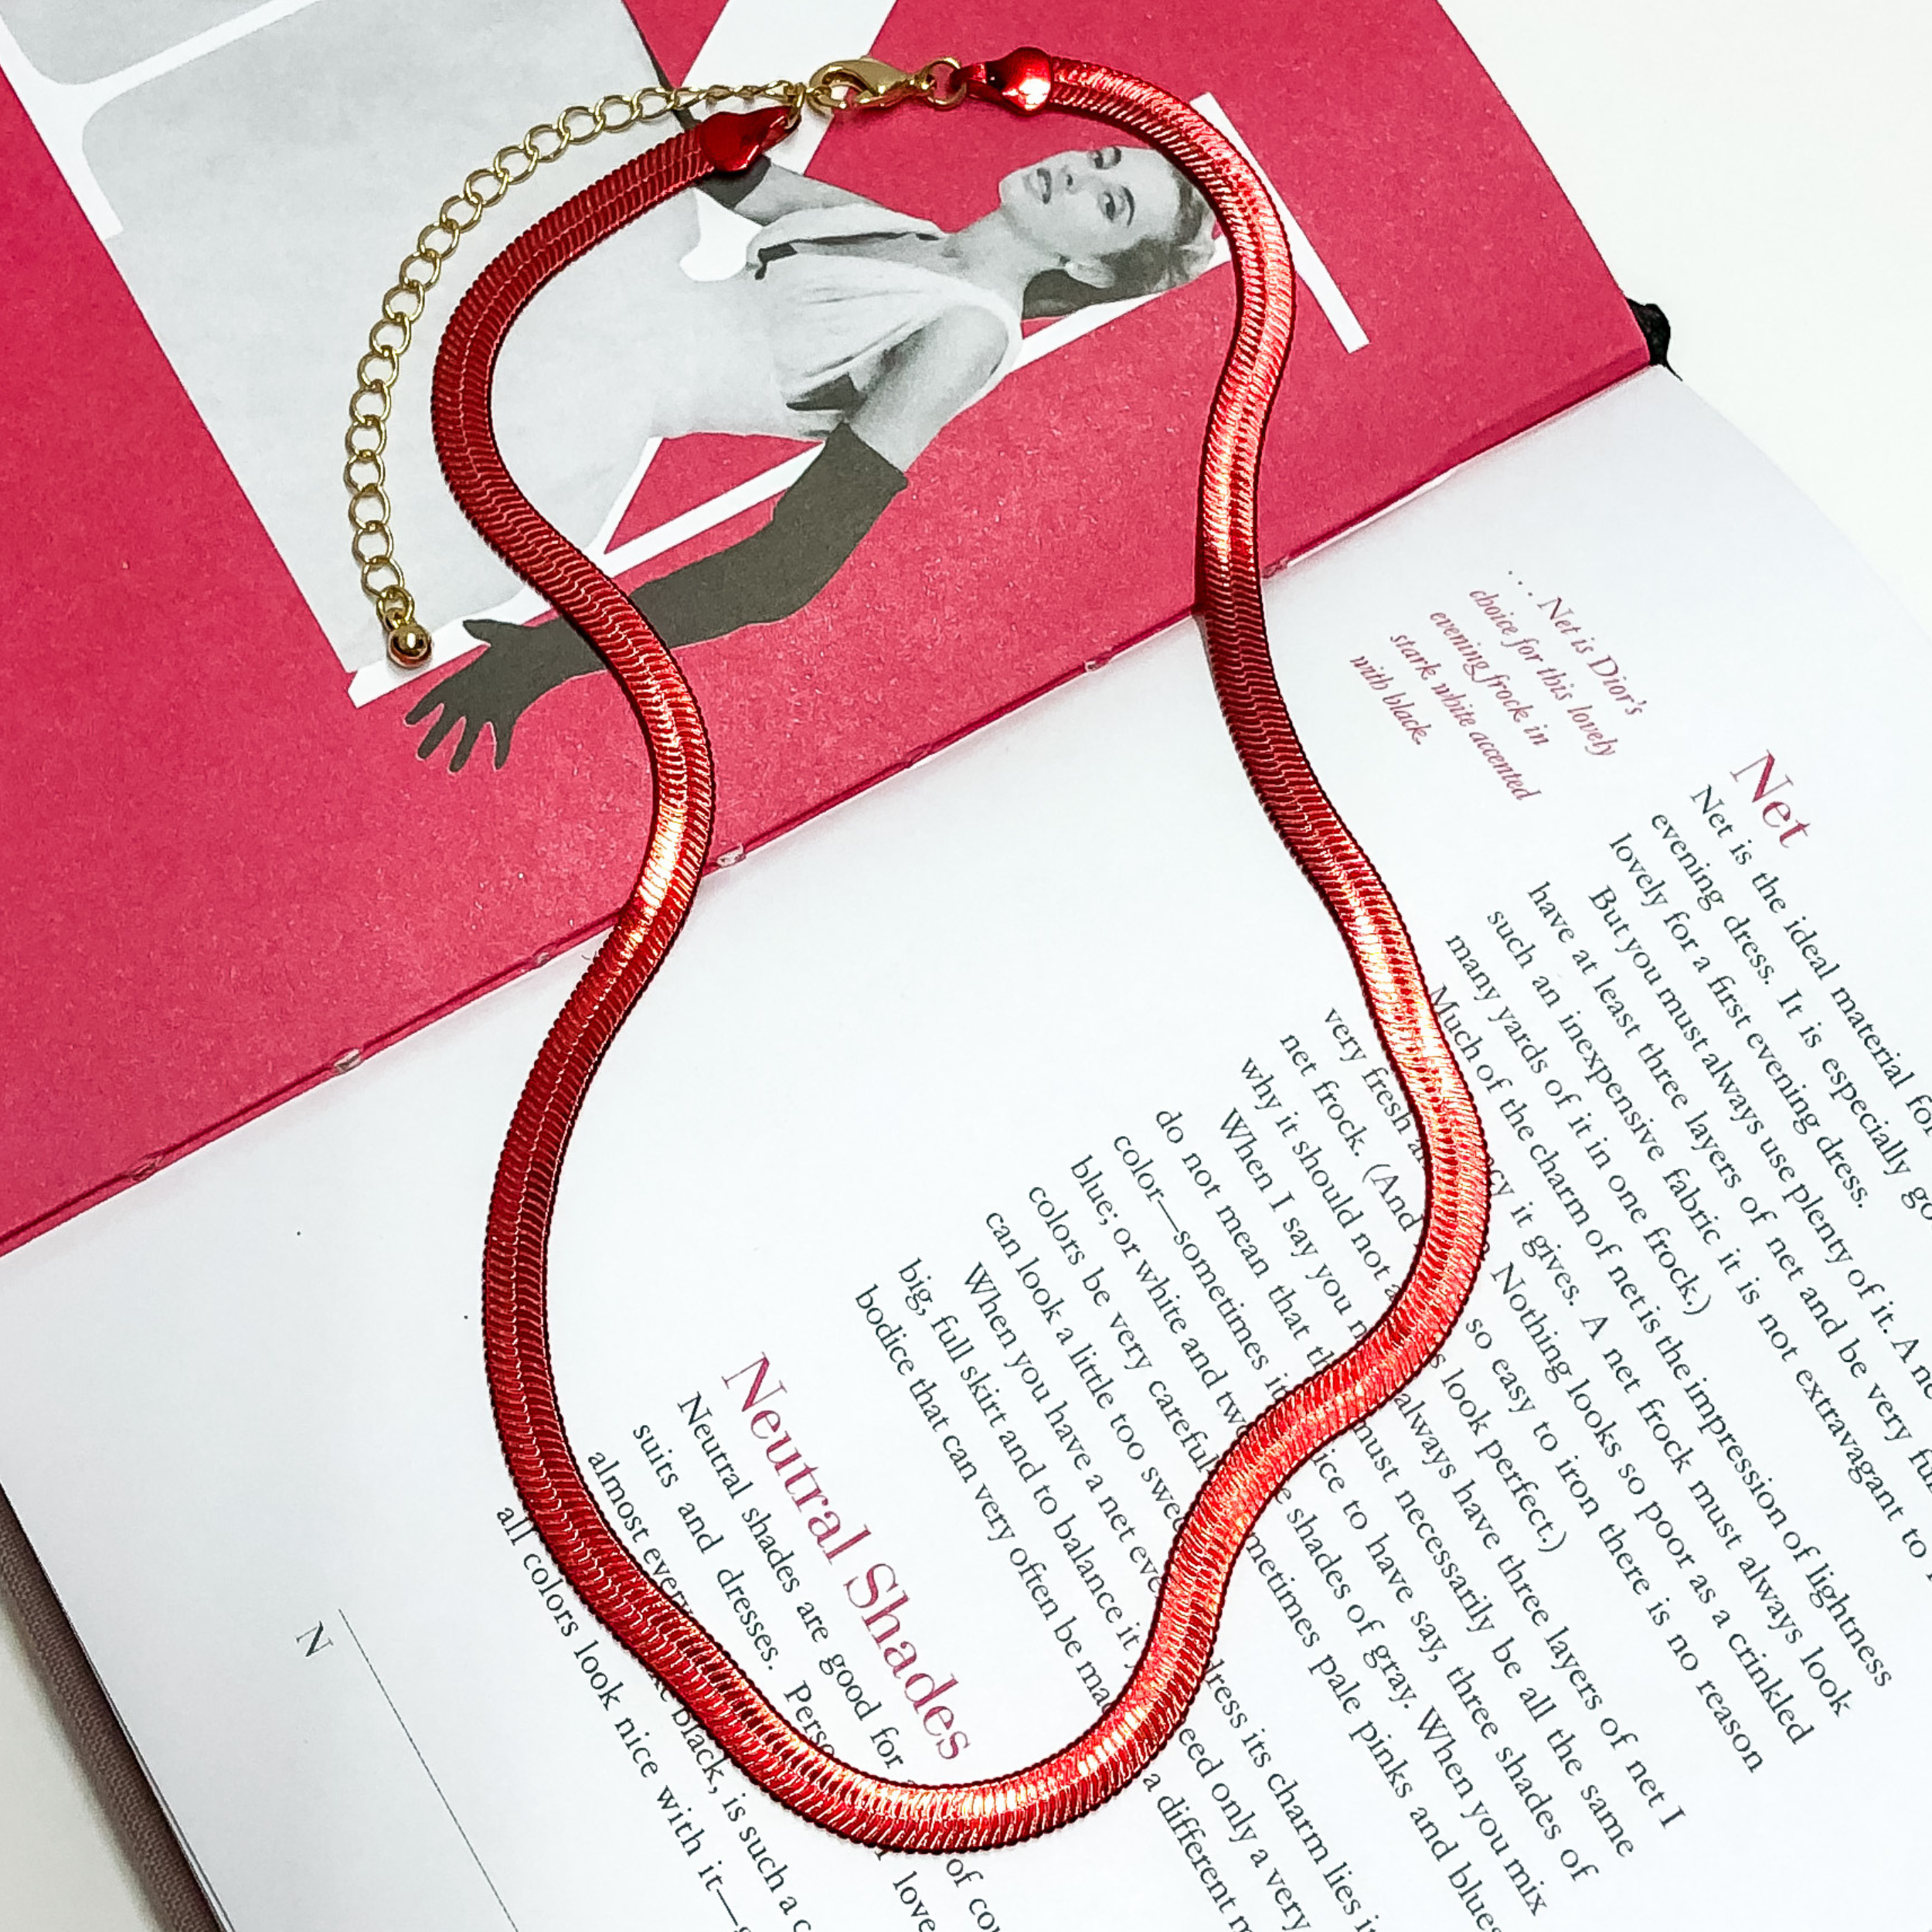 Red Herringbone chain with a gold extender. This necklace is on a opened book, on a white background.